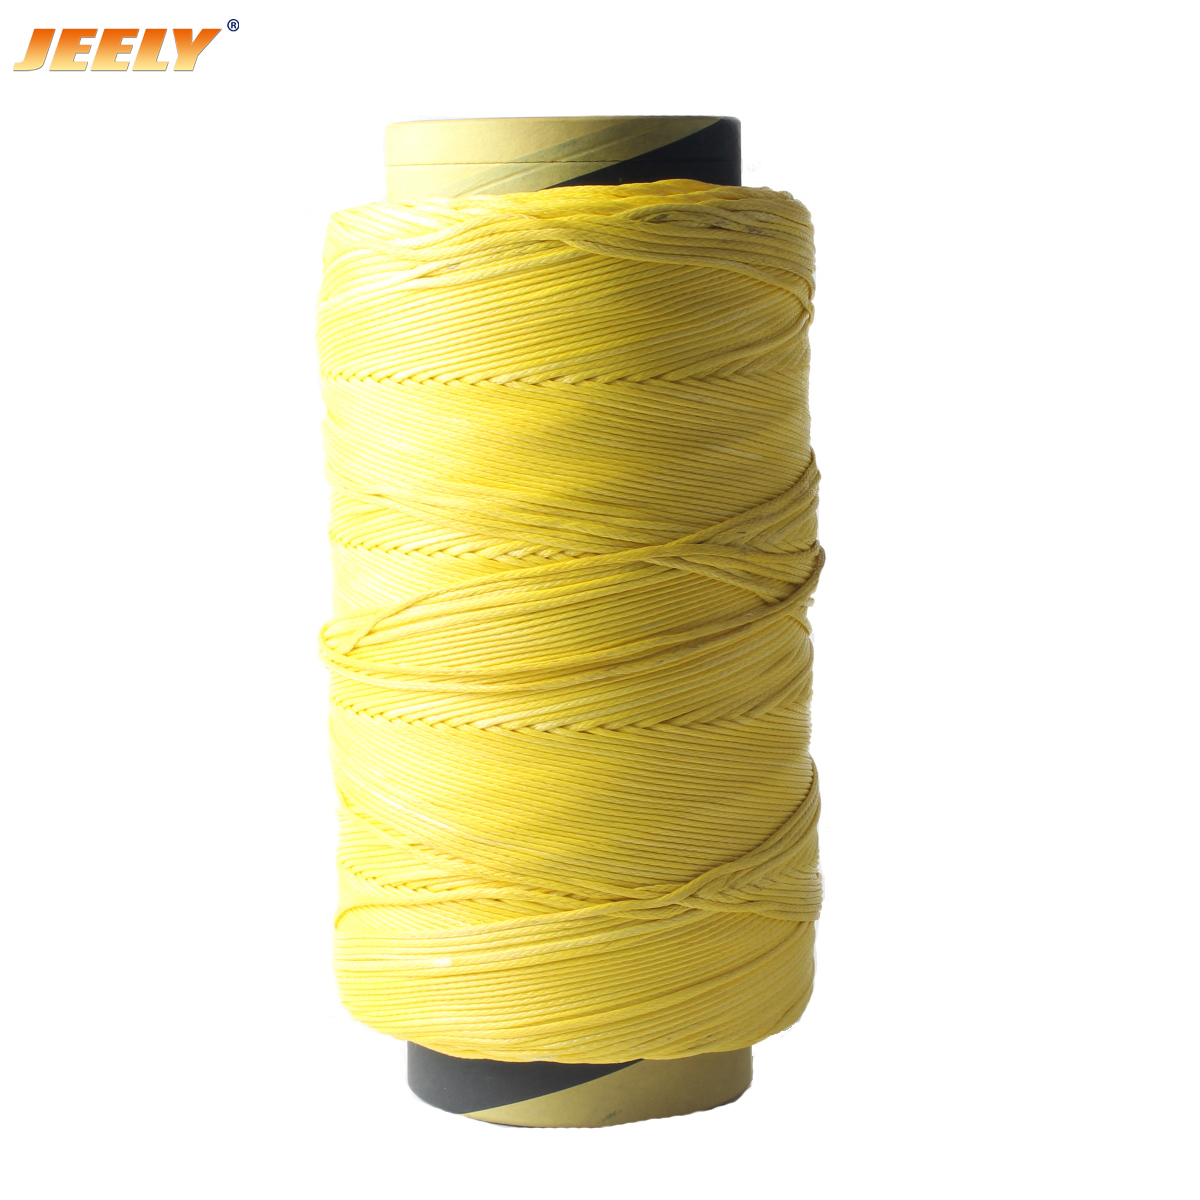 1.4mm 12strands UHMWPE Spearfishing Line